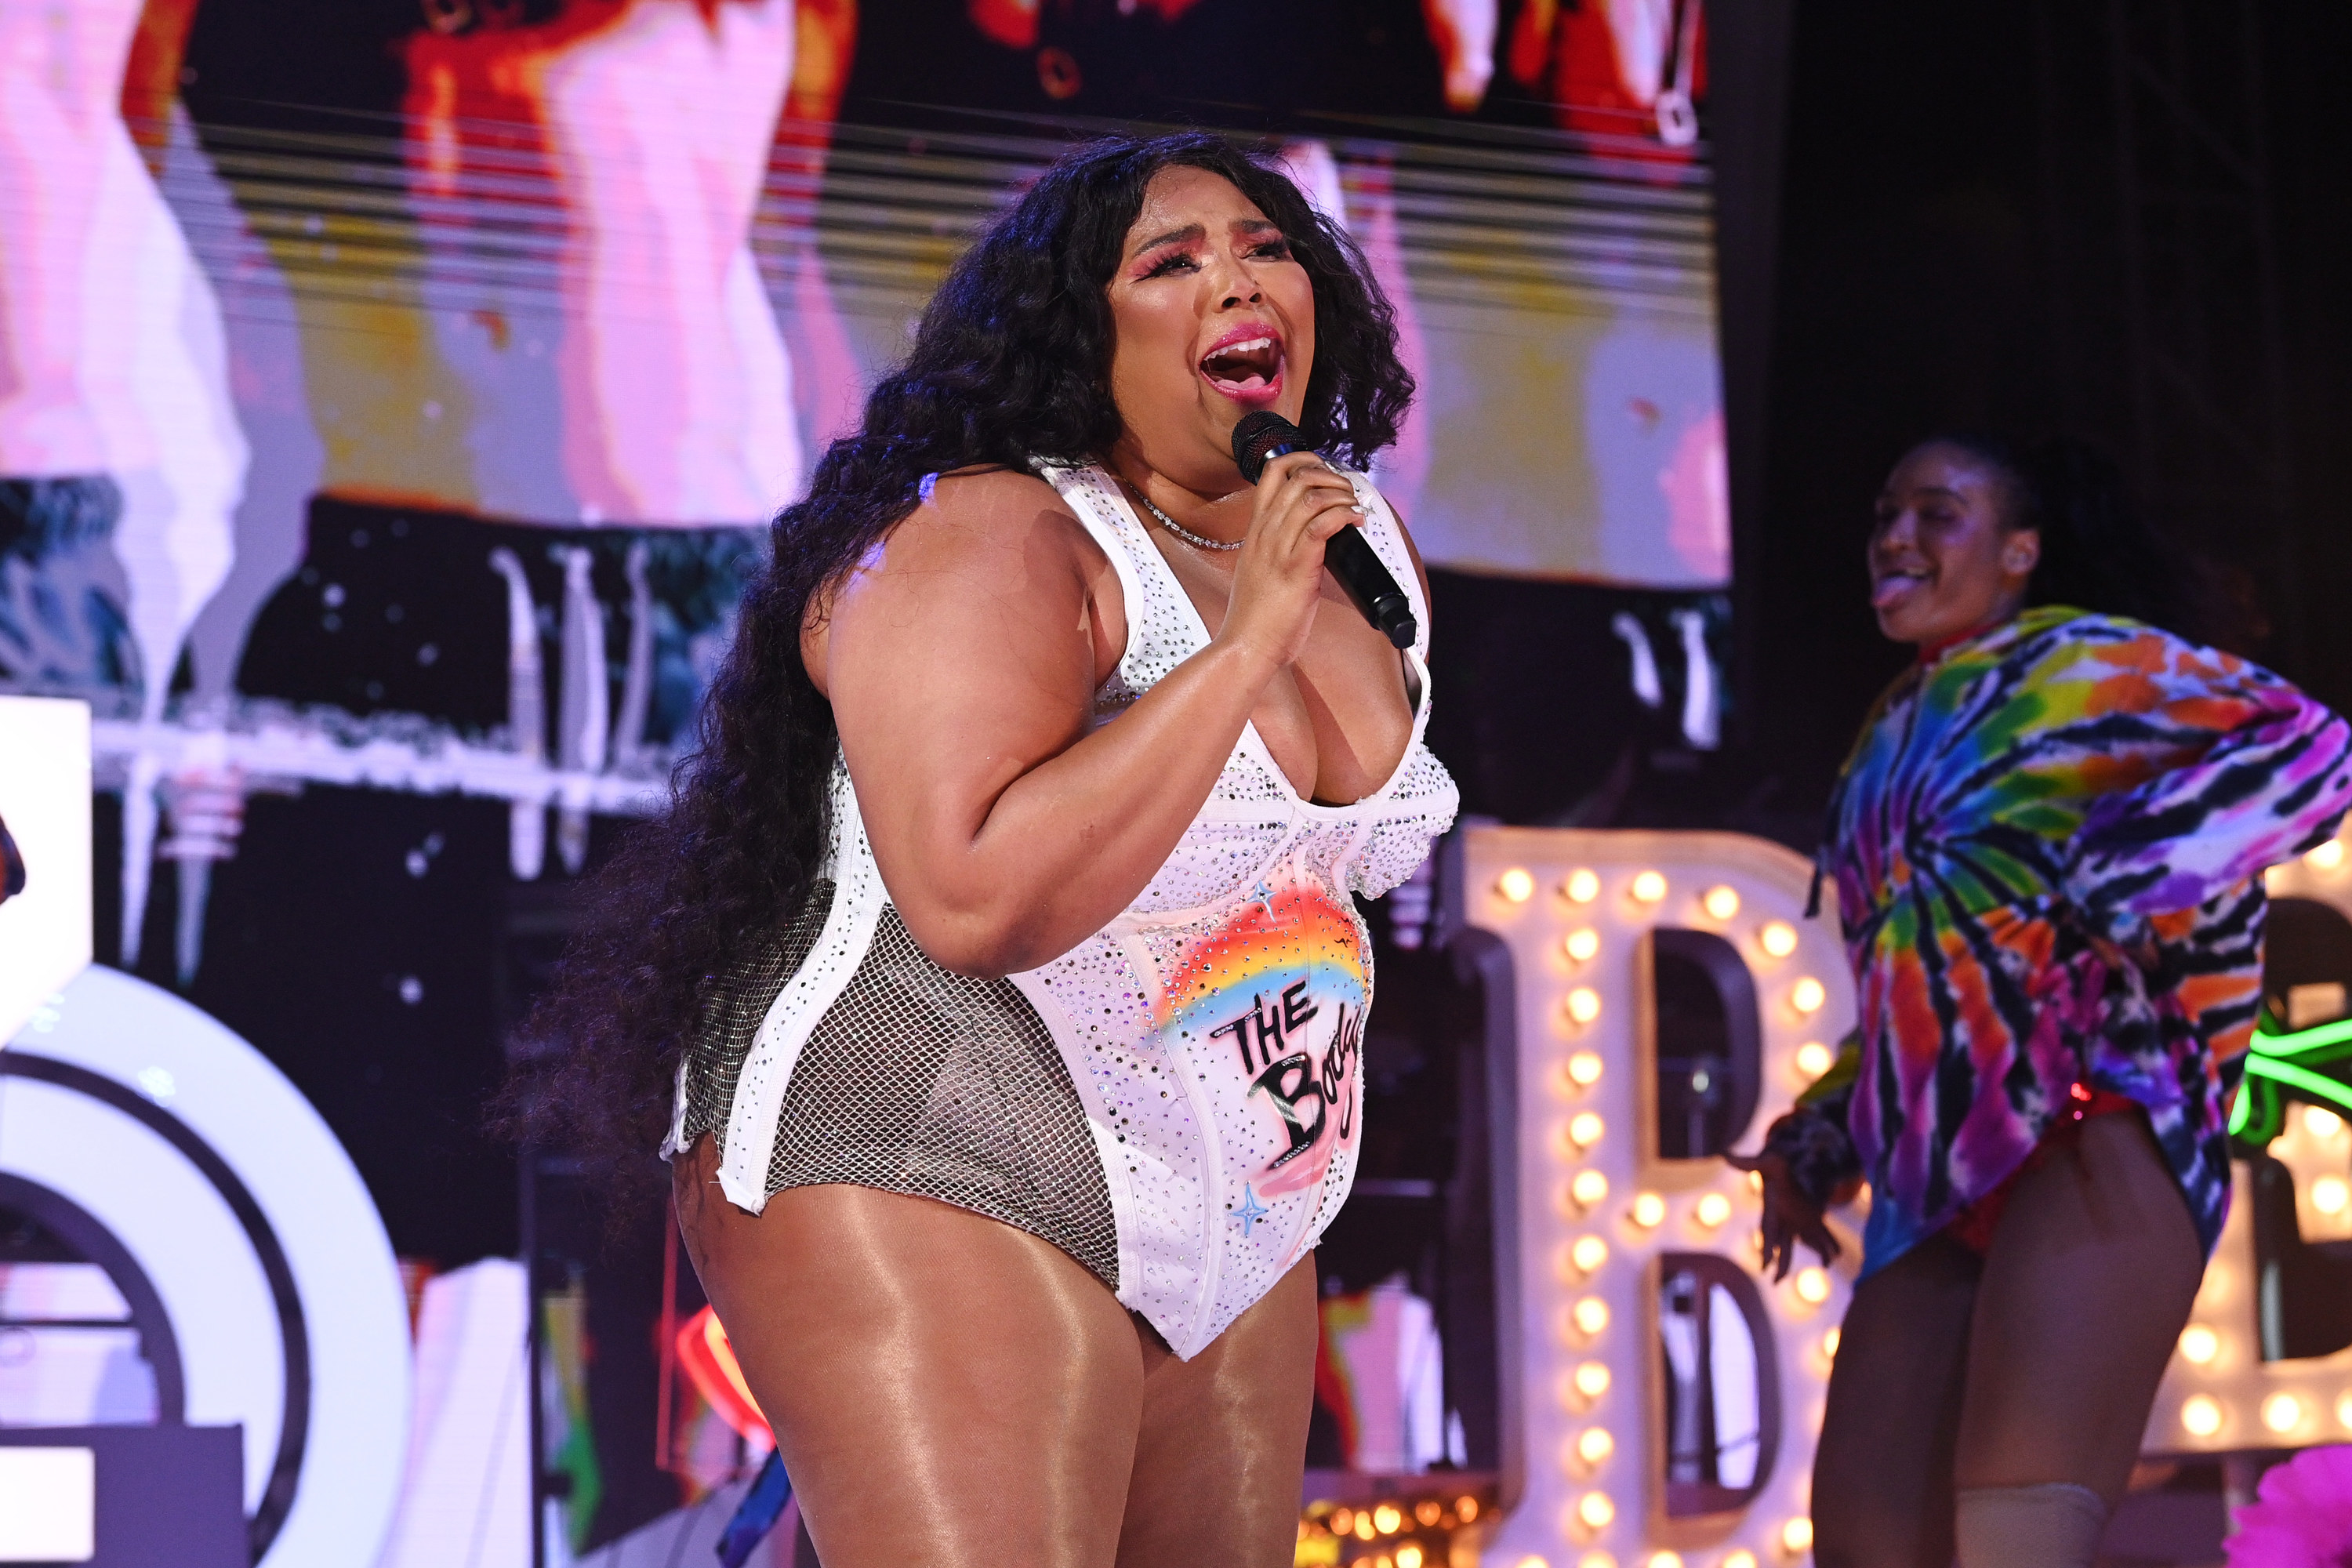 Lizzo singing on stage